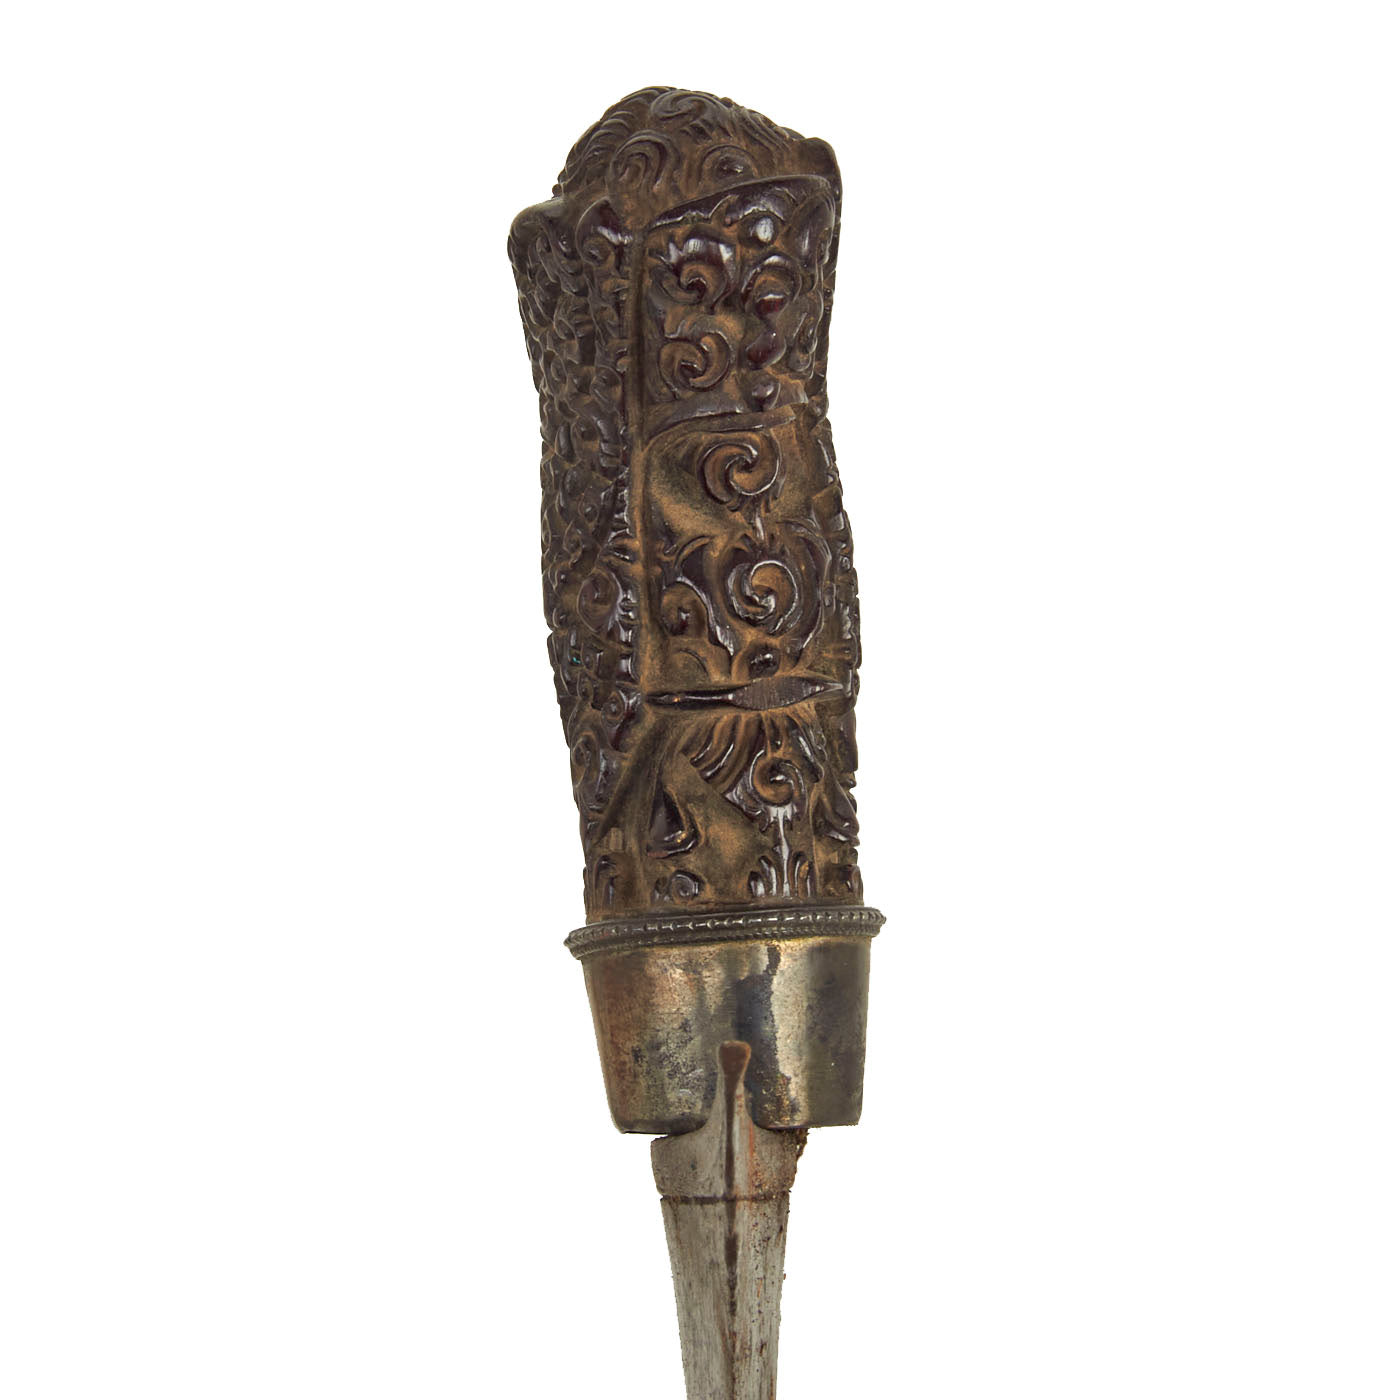 Original Dutch East Indies Kris Dagger with Carved Handle in